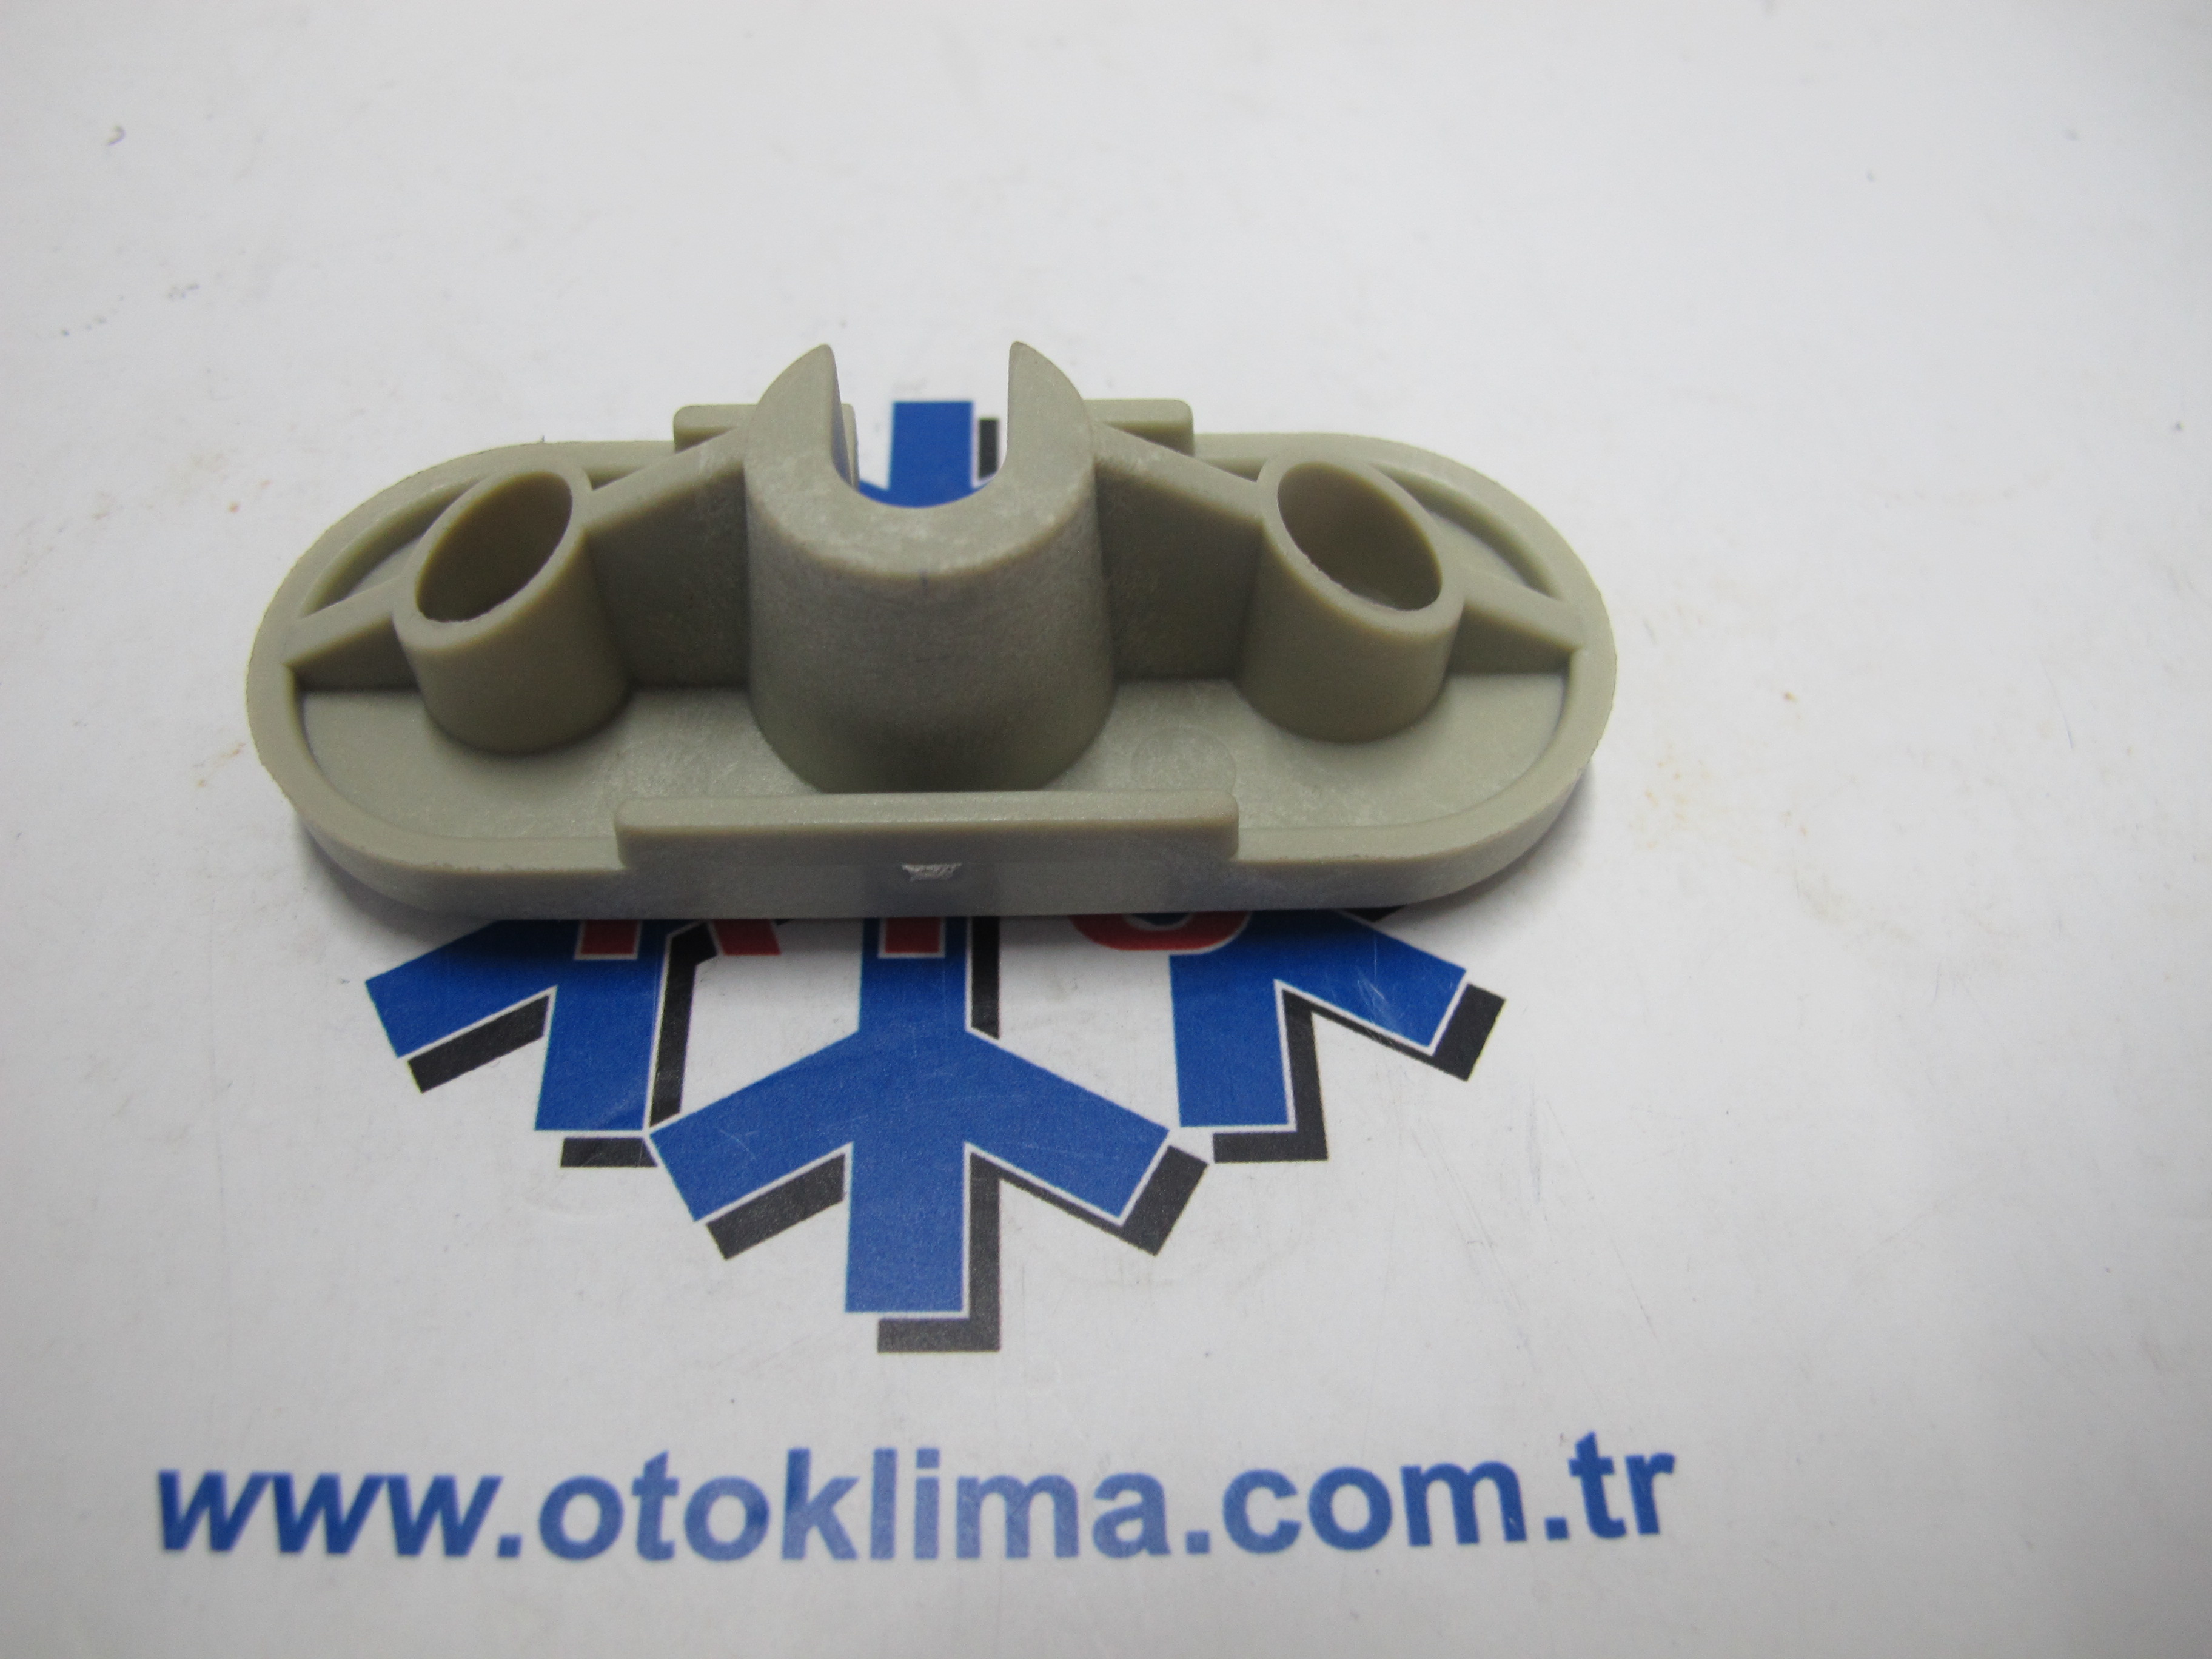  KYOTP002 FORD CONNECT FİESTA